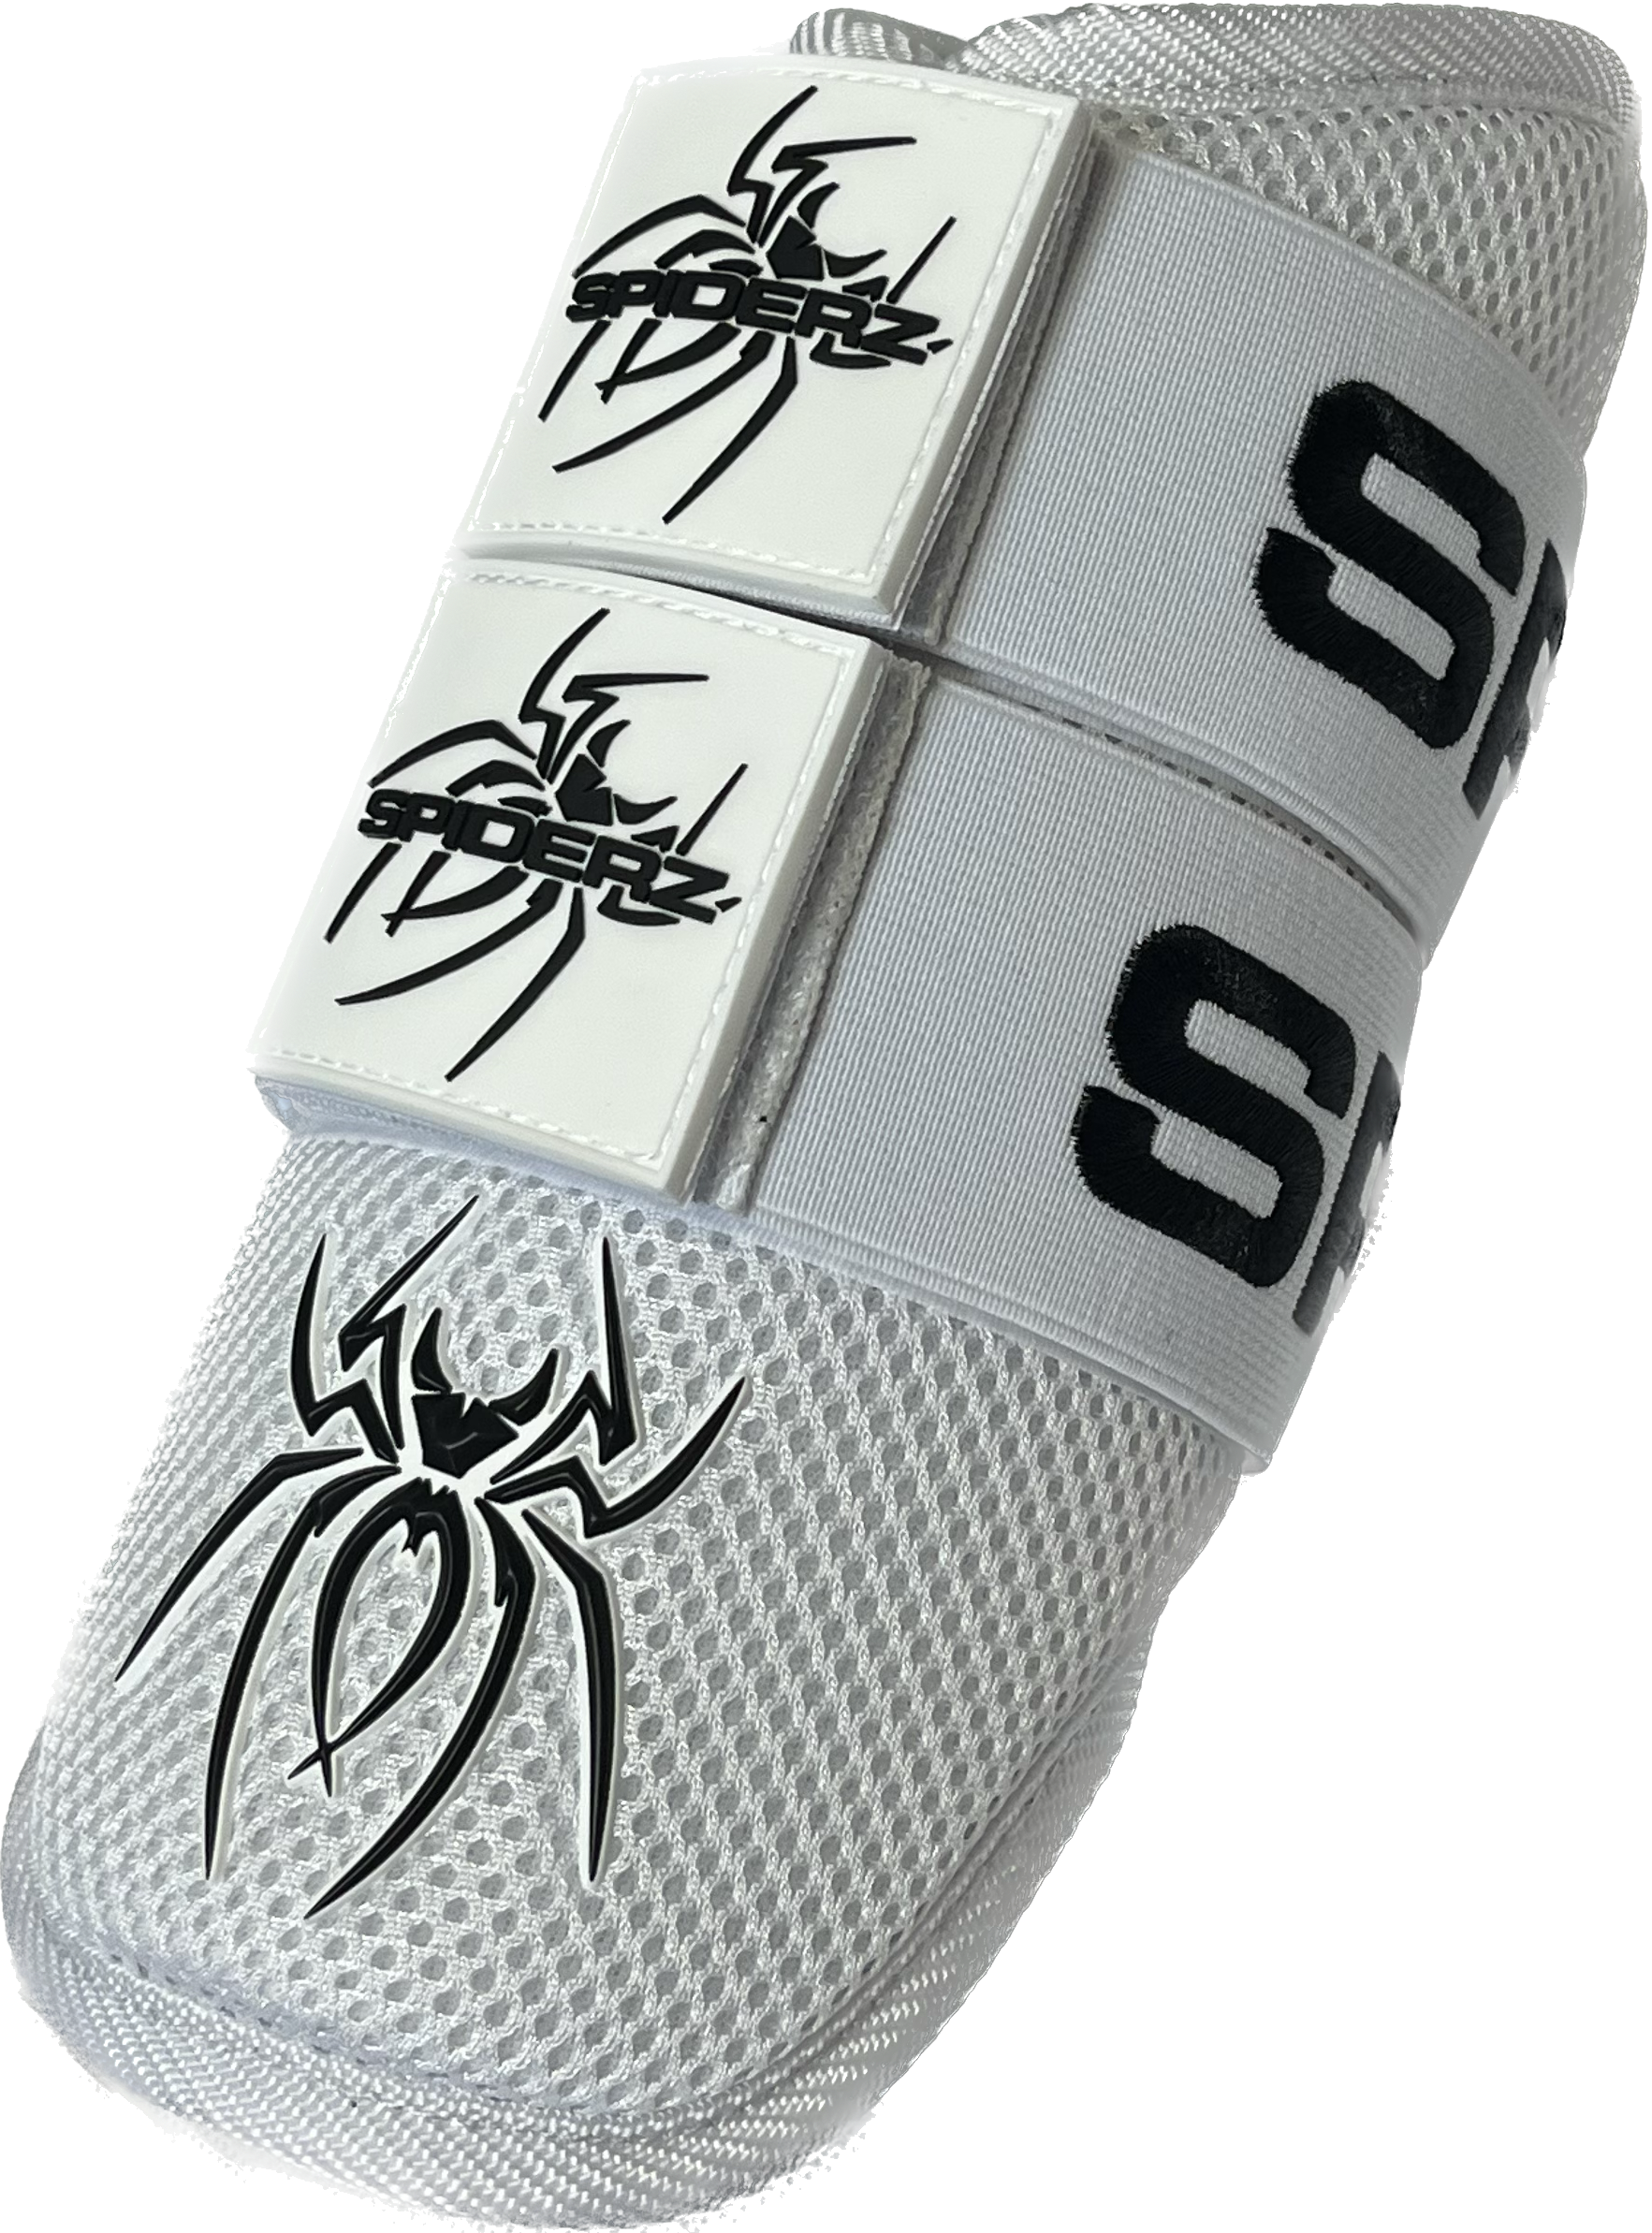 Spiderz Elbow Guard (7 color options)